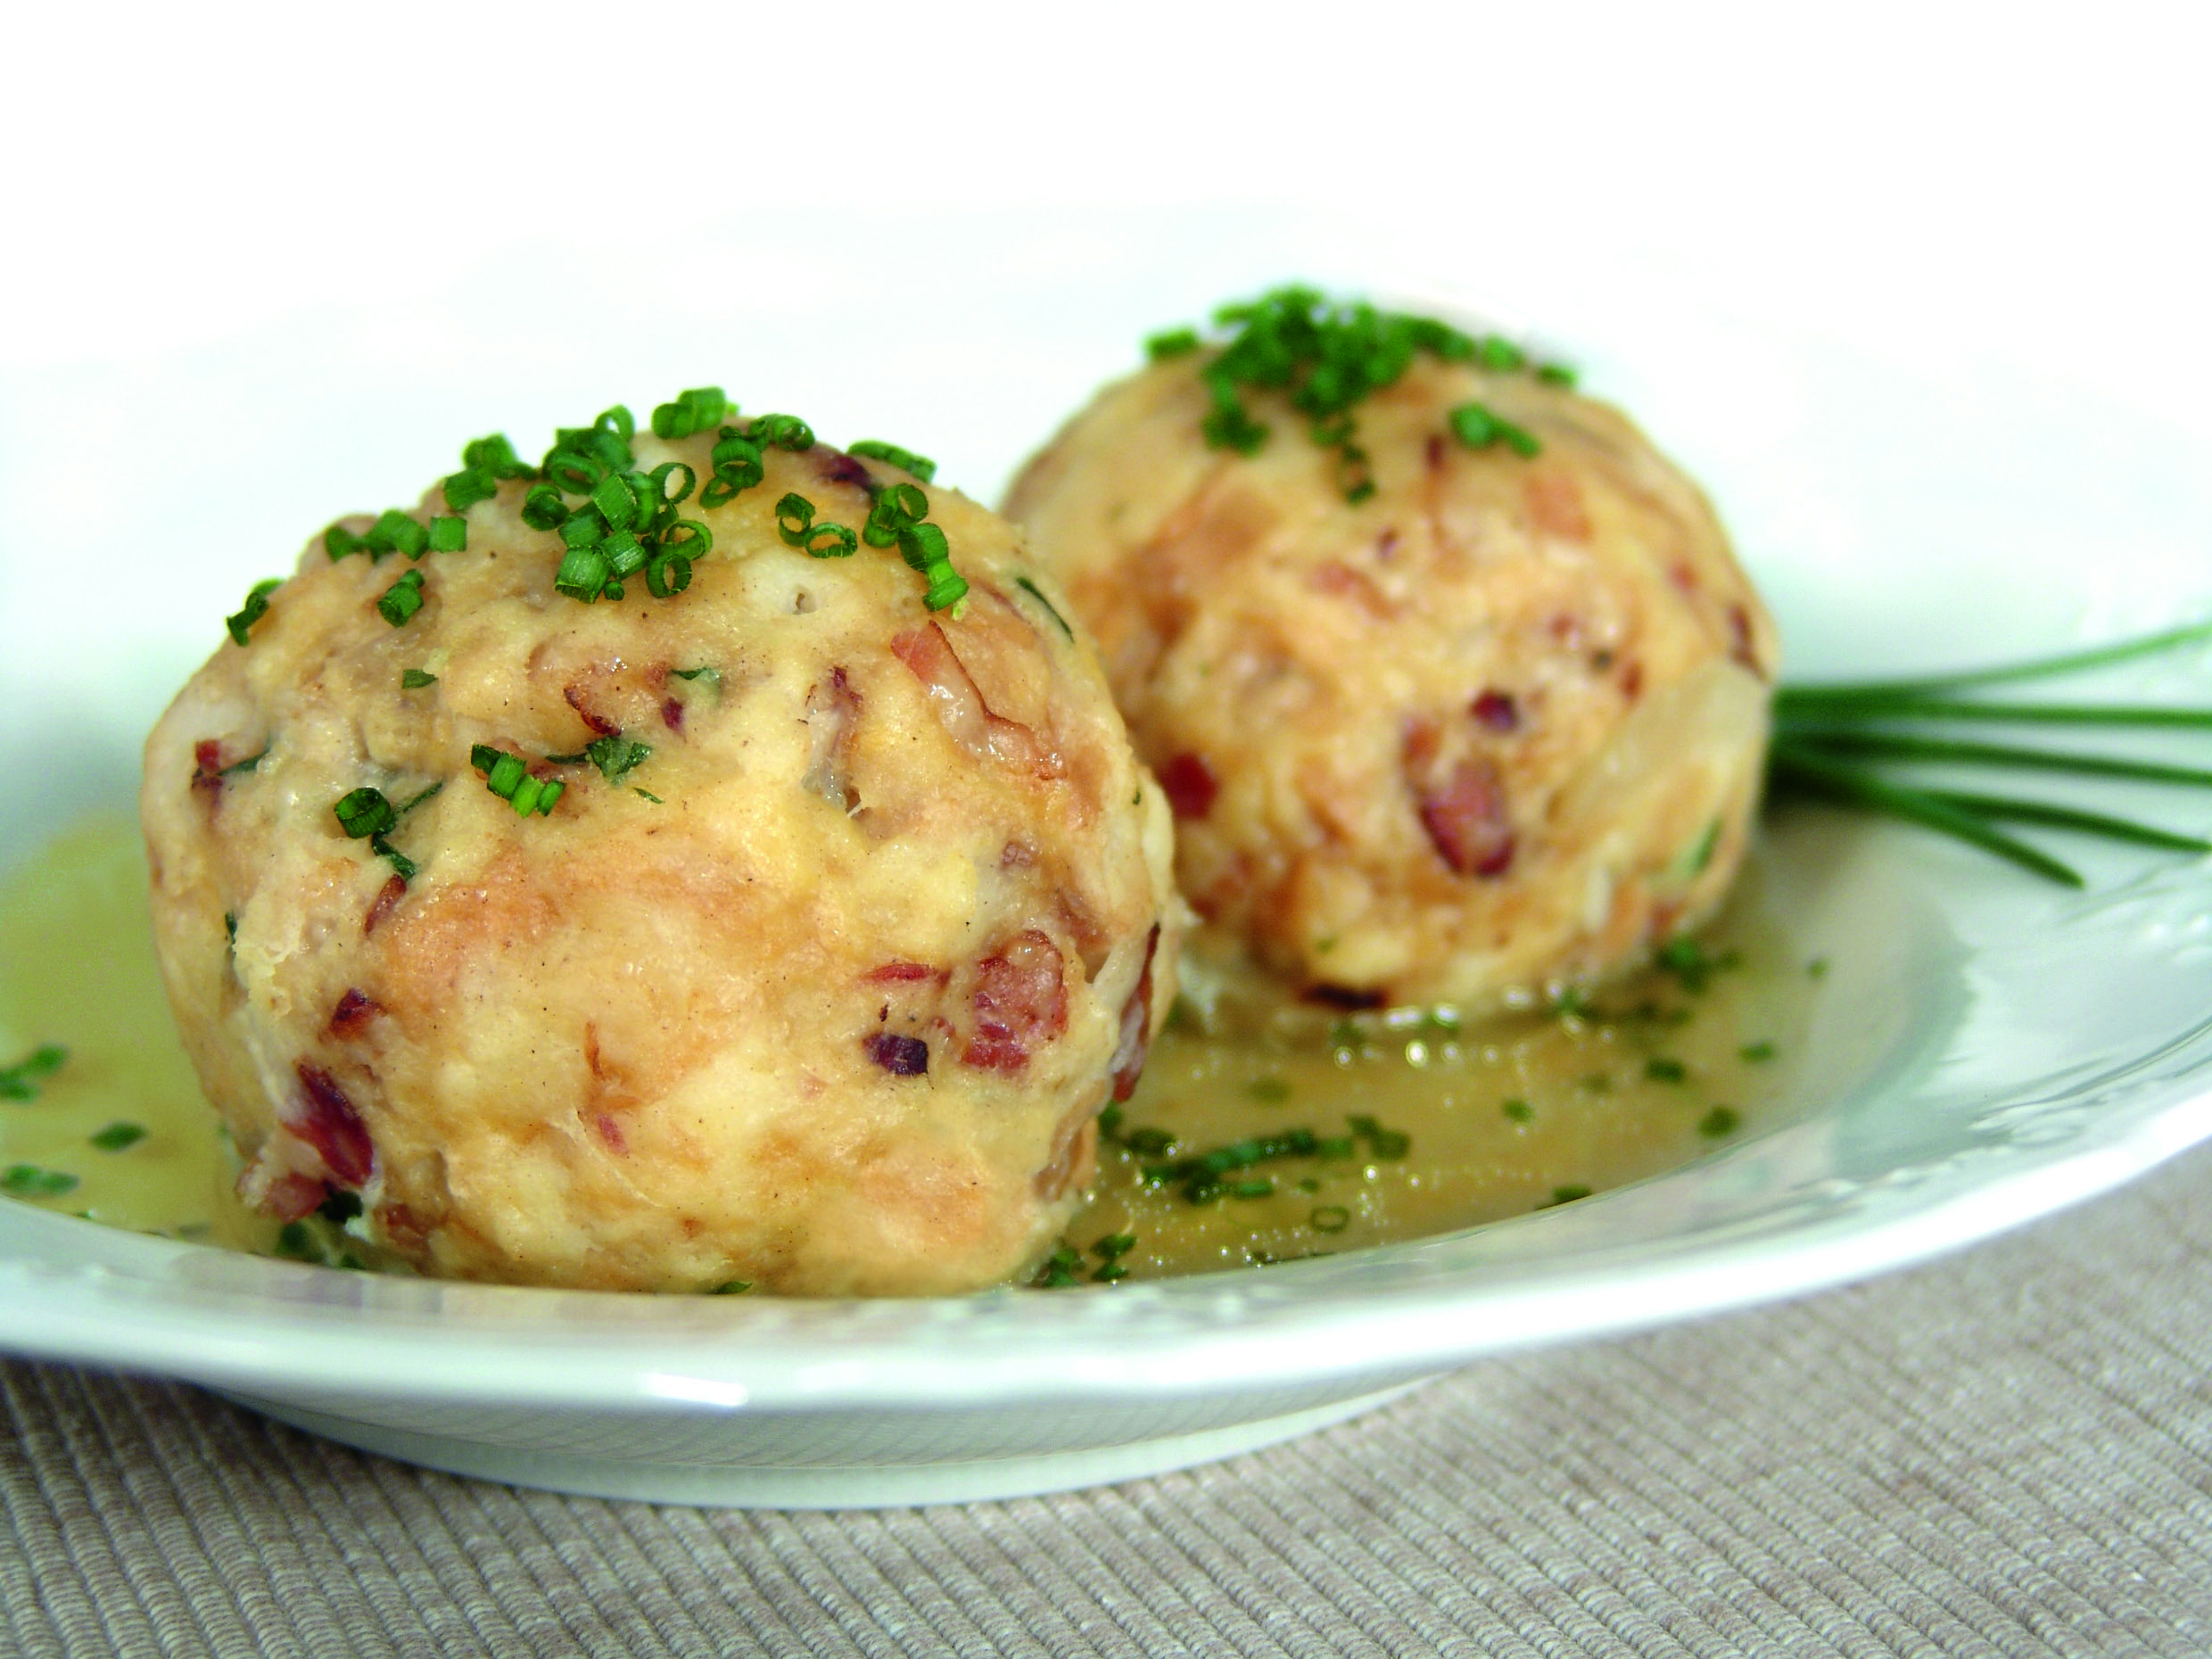 Tyrolean Bacon Dumplings – Make your own ‘Speckknödel’ with this recipe (and photos)